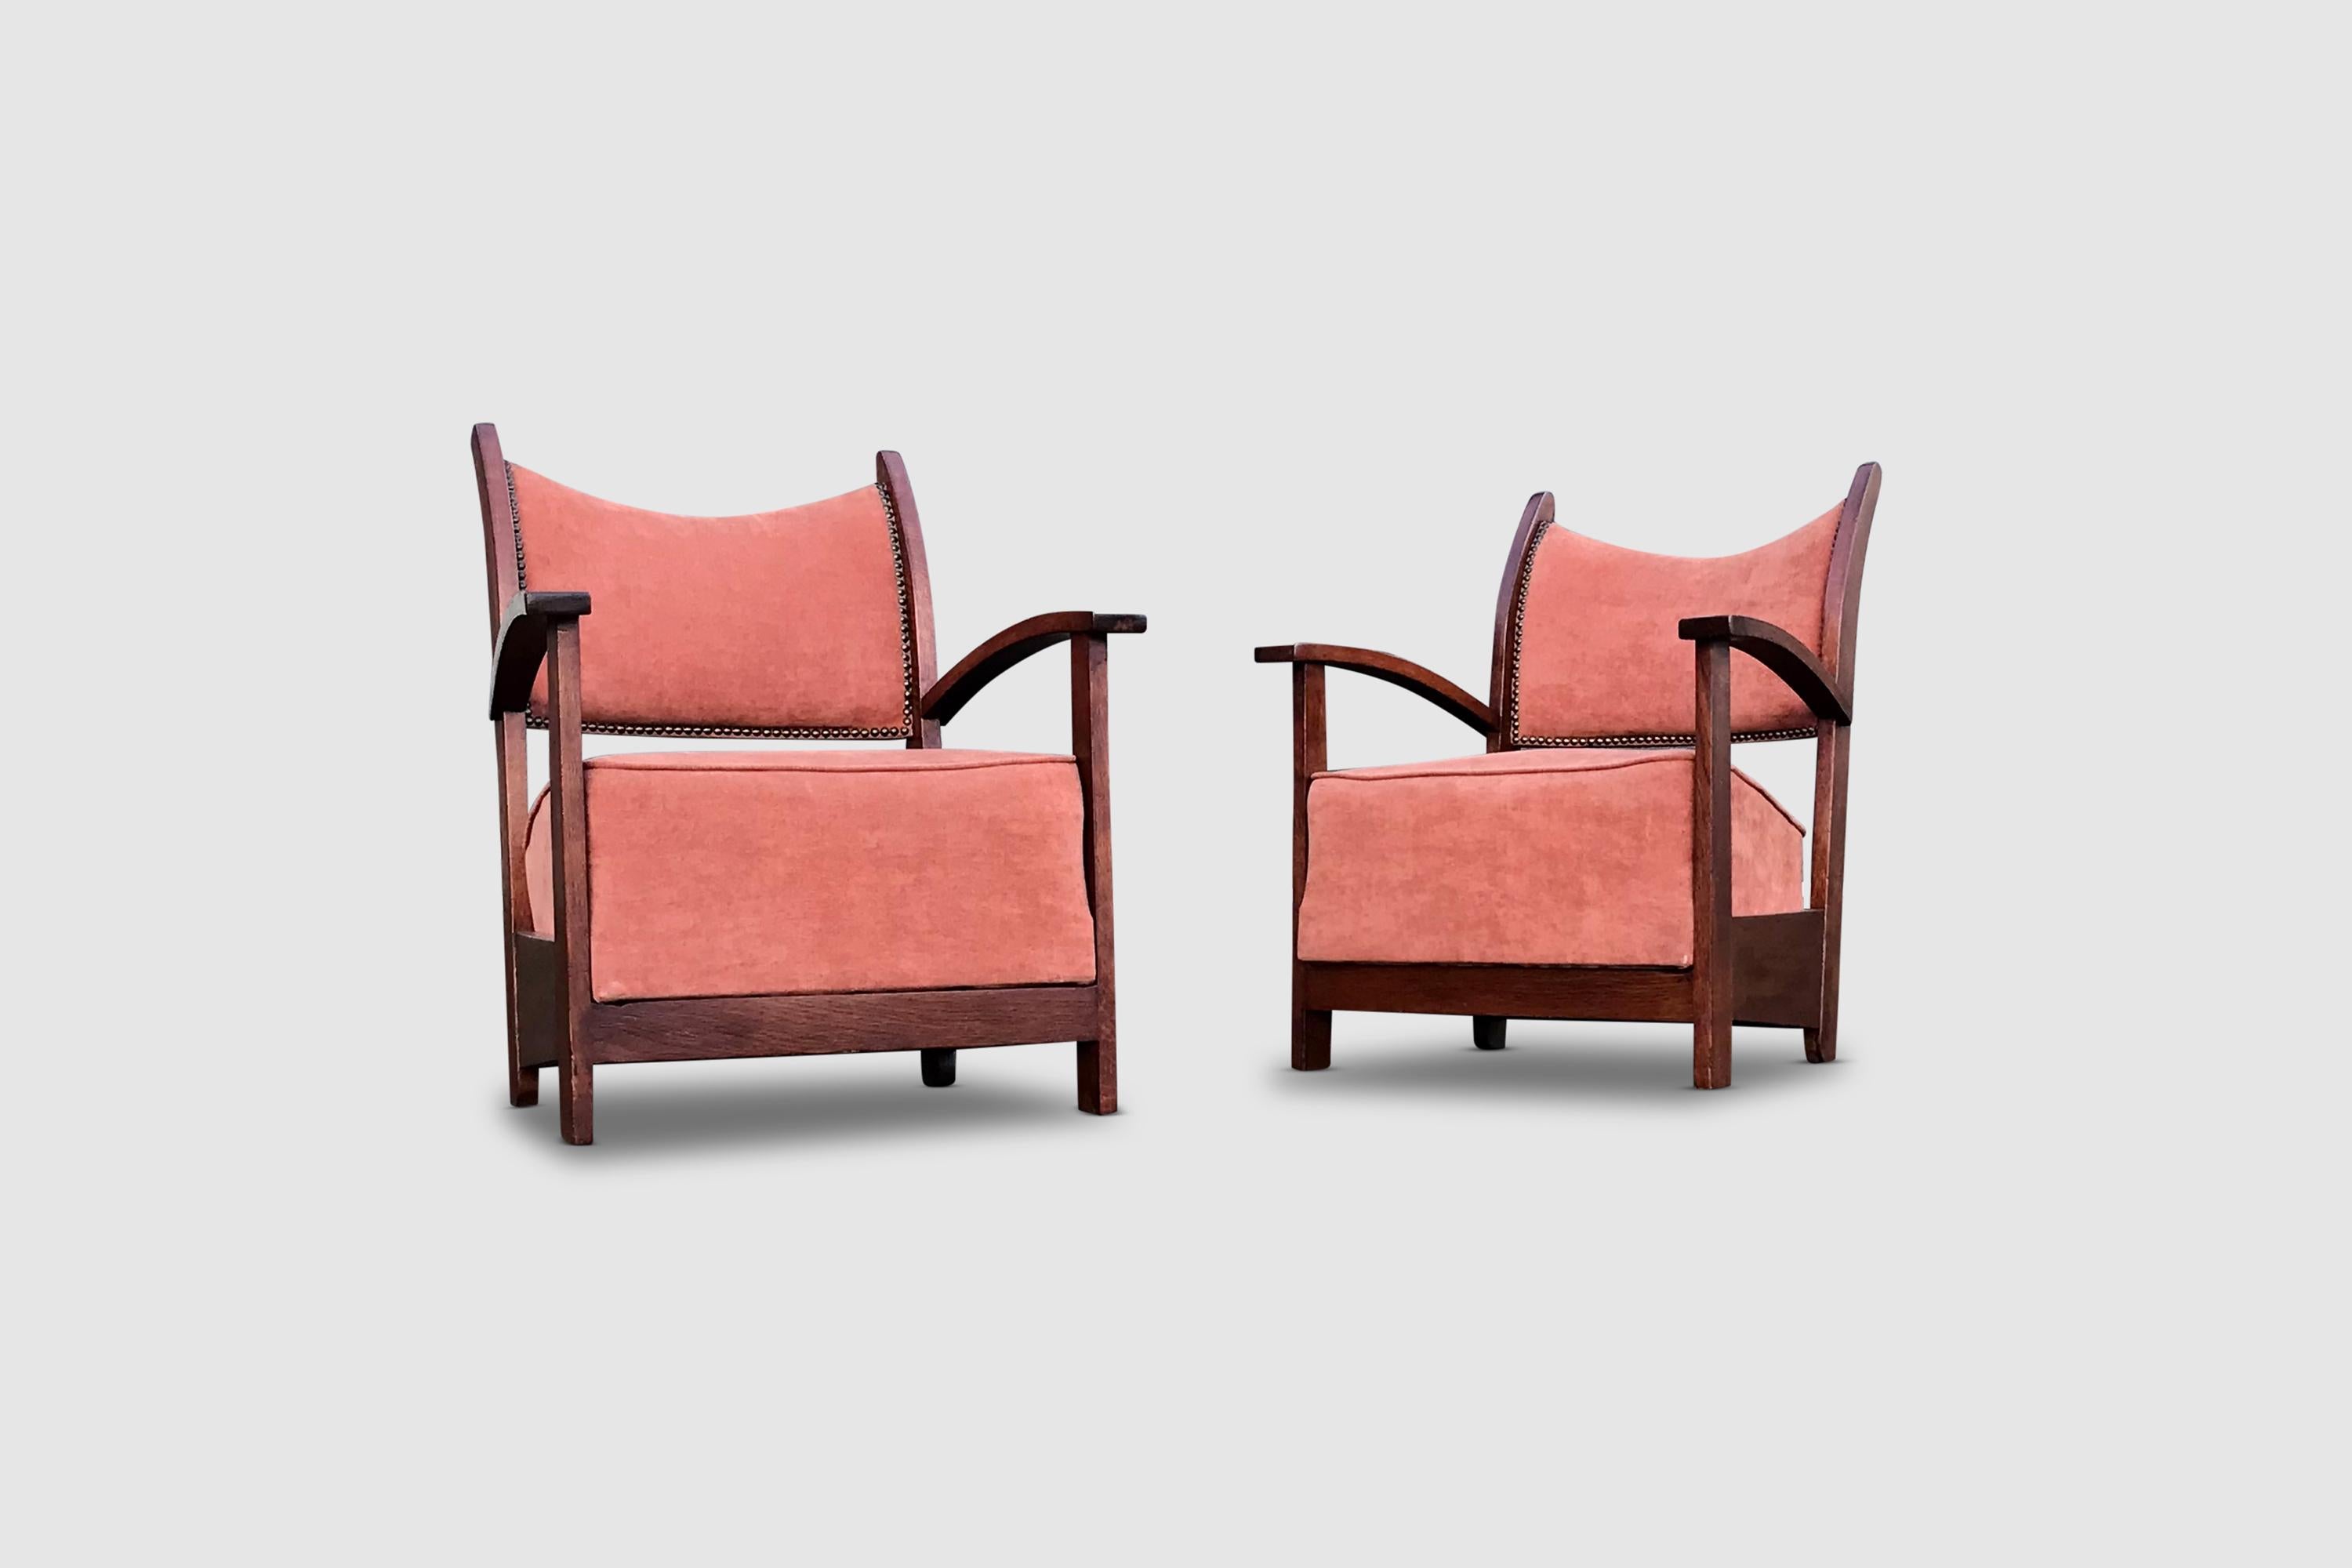 Low Oak and Tweed Armchairs Amsterdamse School 1930s, Set of 2 For Sale 2